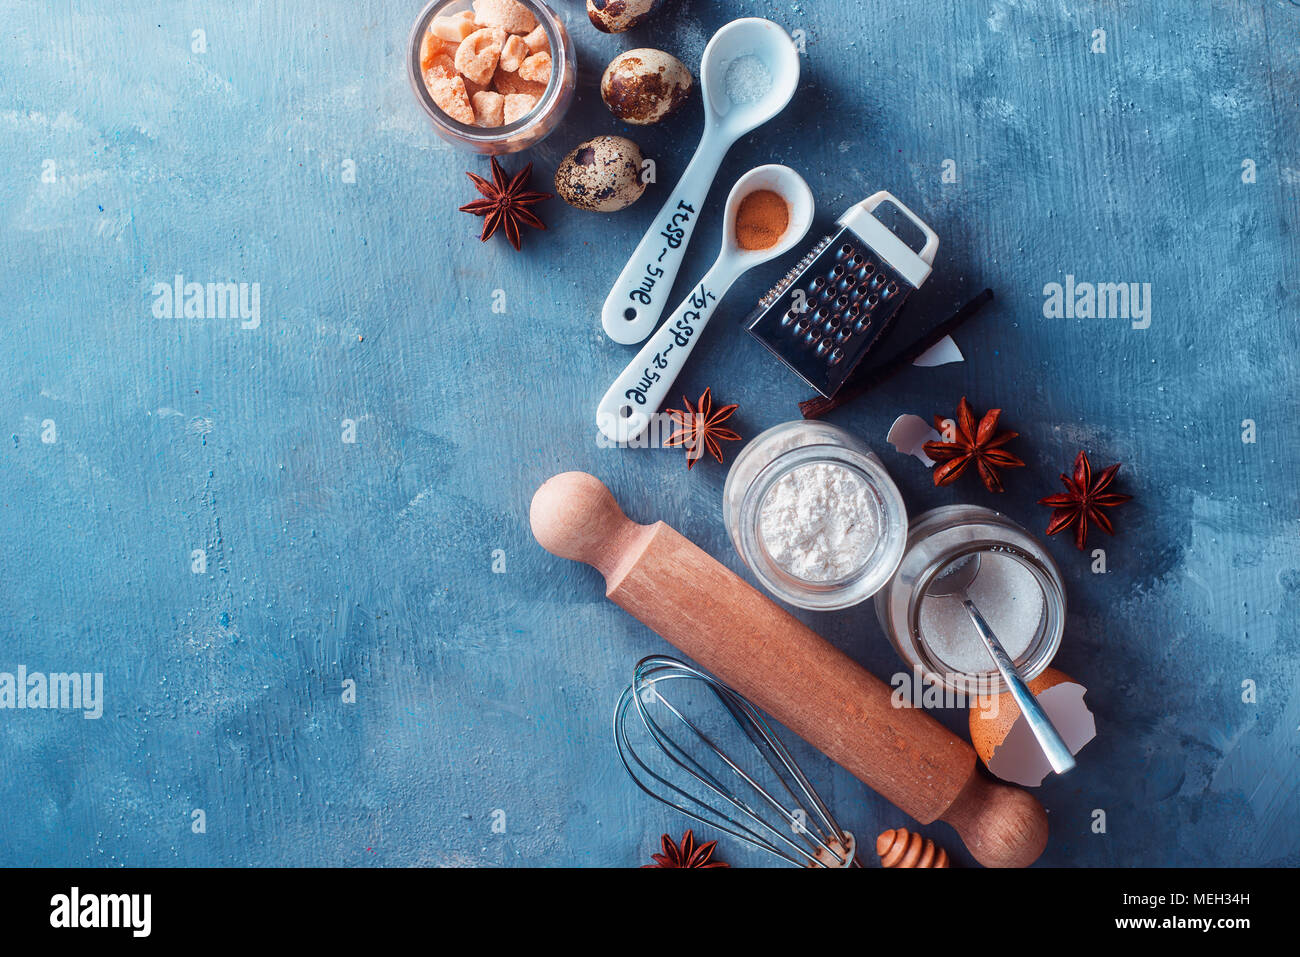 Flat lay pastry preparation concept. Baking ingredients flat lay with flour, sugar, cinnamon, anise, eggs, rolling pin, grinder, honey spoons and measuring spoons. Concrete background with copy space Stock Photo